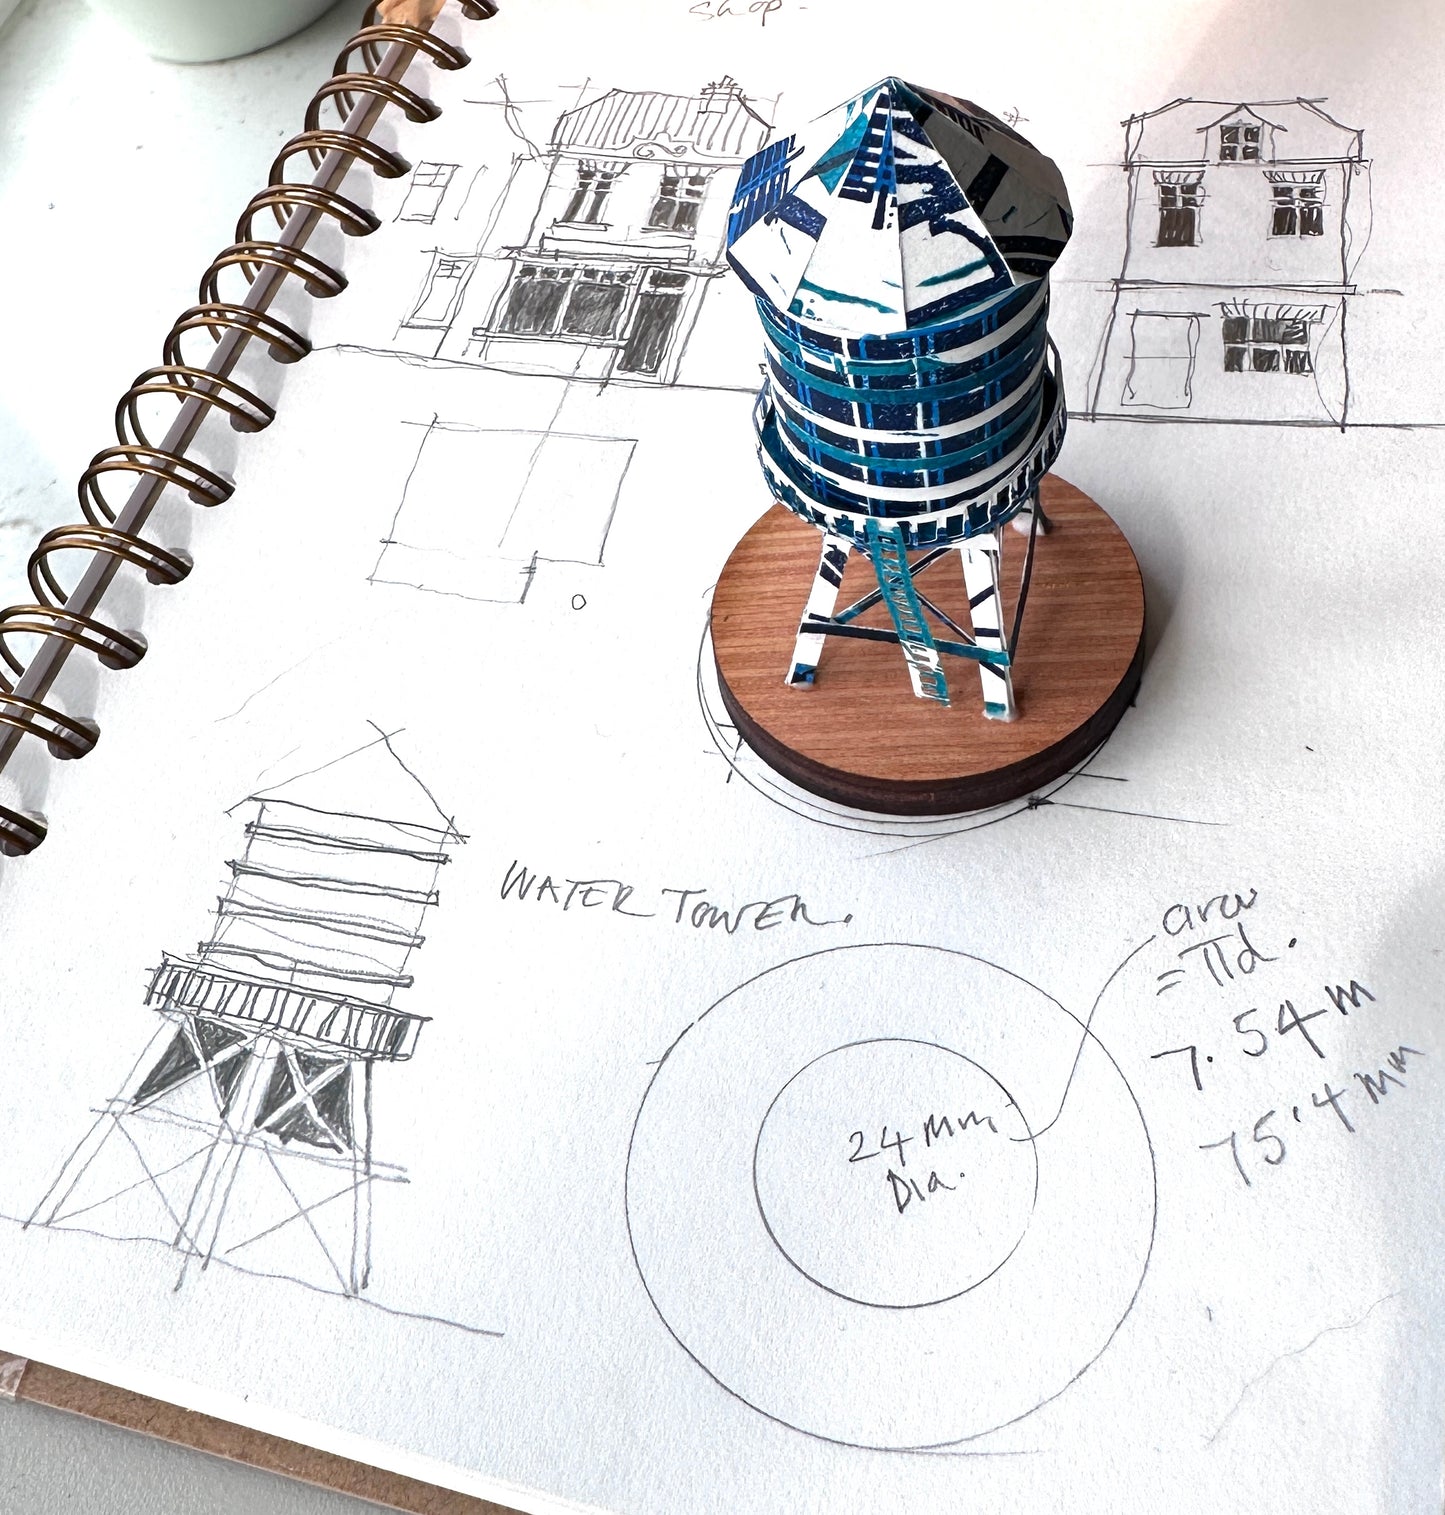 Handcut paper water tower over printed in shades of blue on wood base sitting on original sketch of water tower 